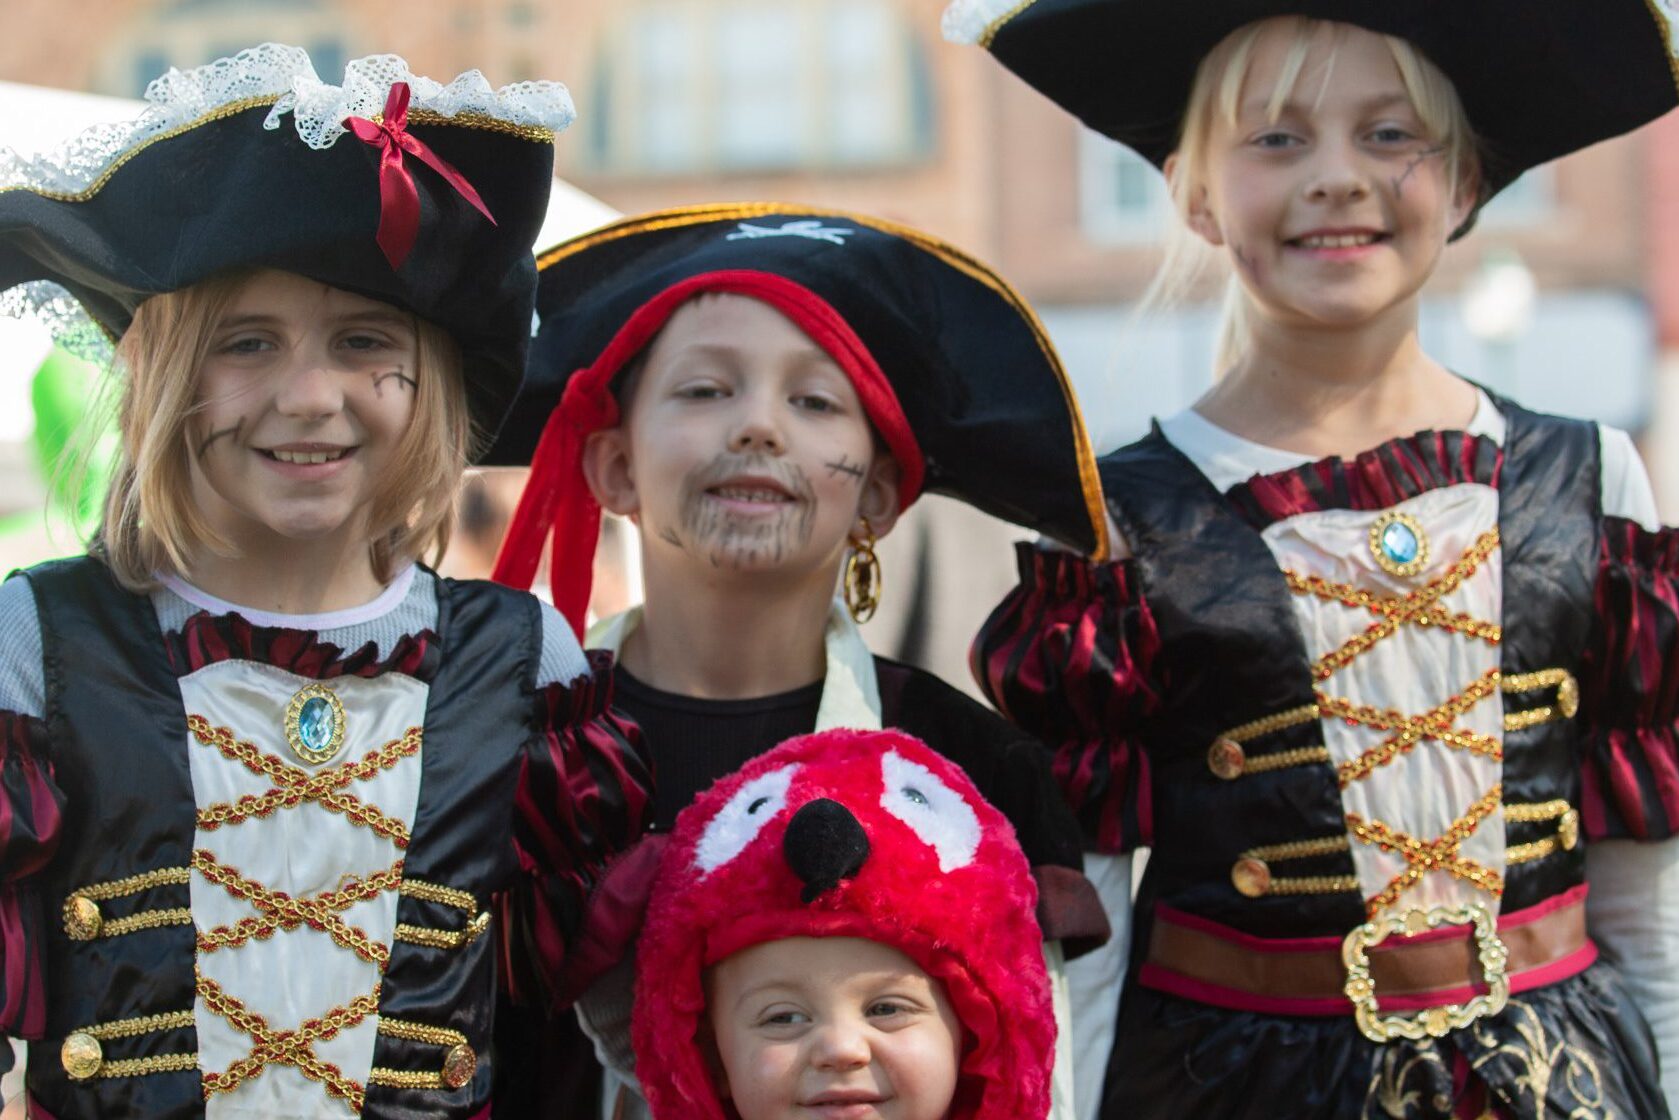 children dressed up as pirates for Halloween